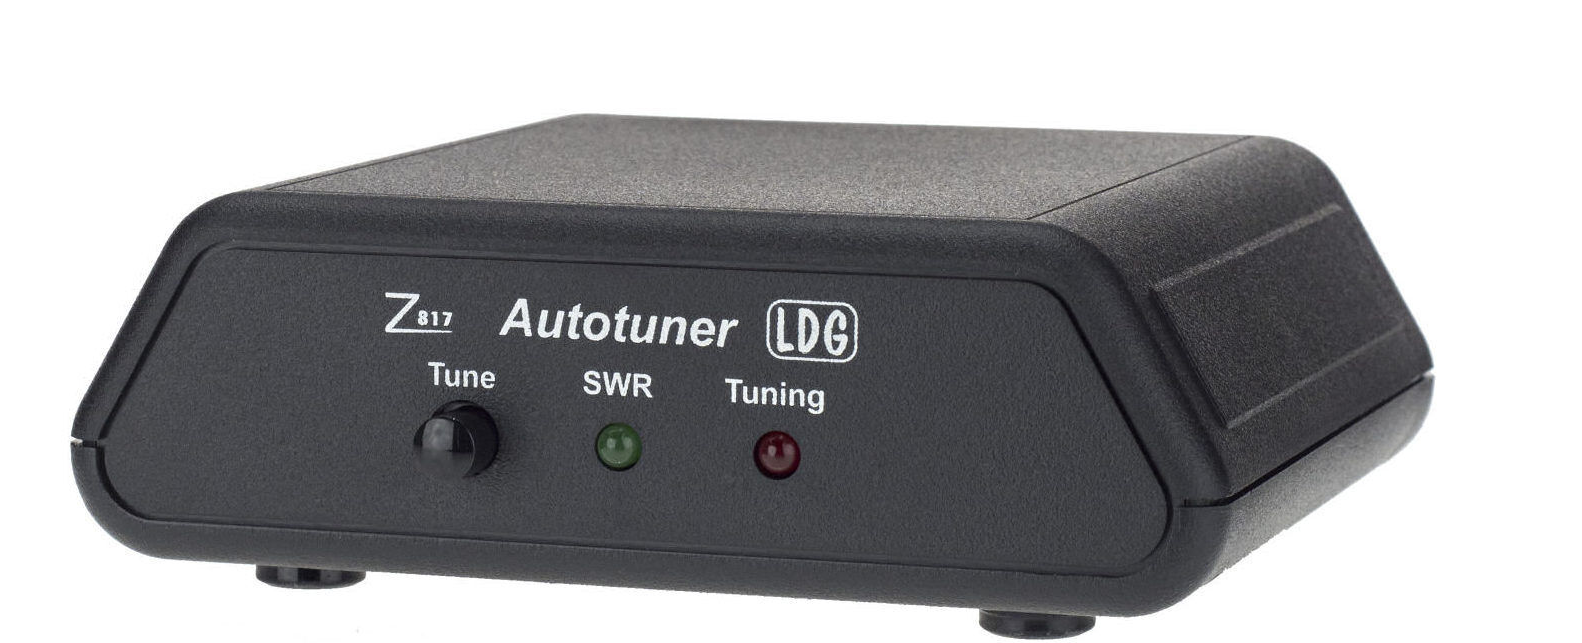 LDG Z-817 Automatic QRP ATU is designed for use with the FT-817 and FT-818  QRP transceivers